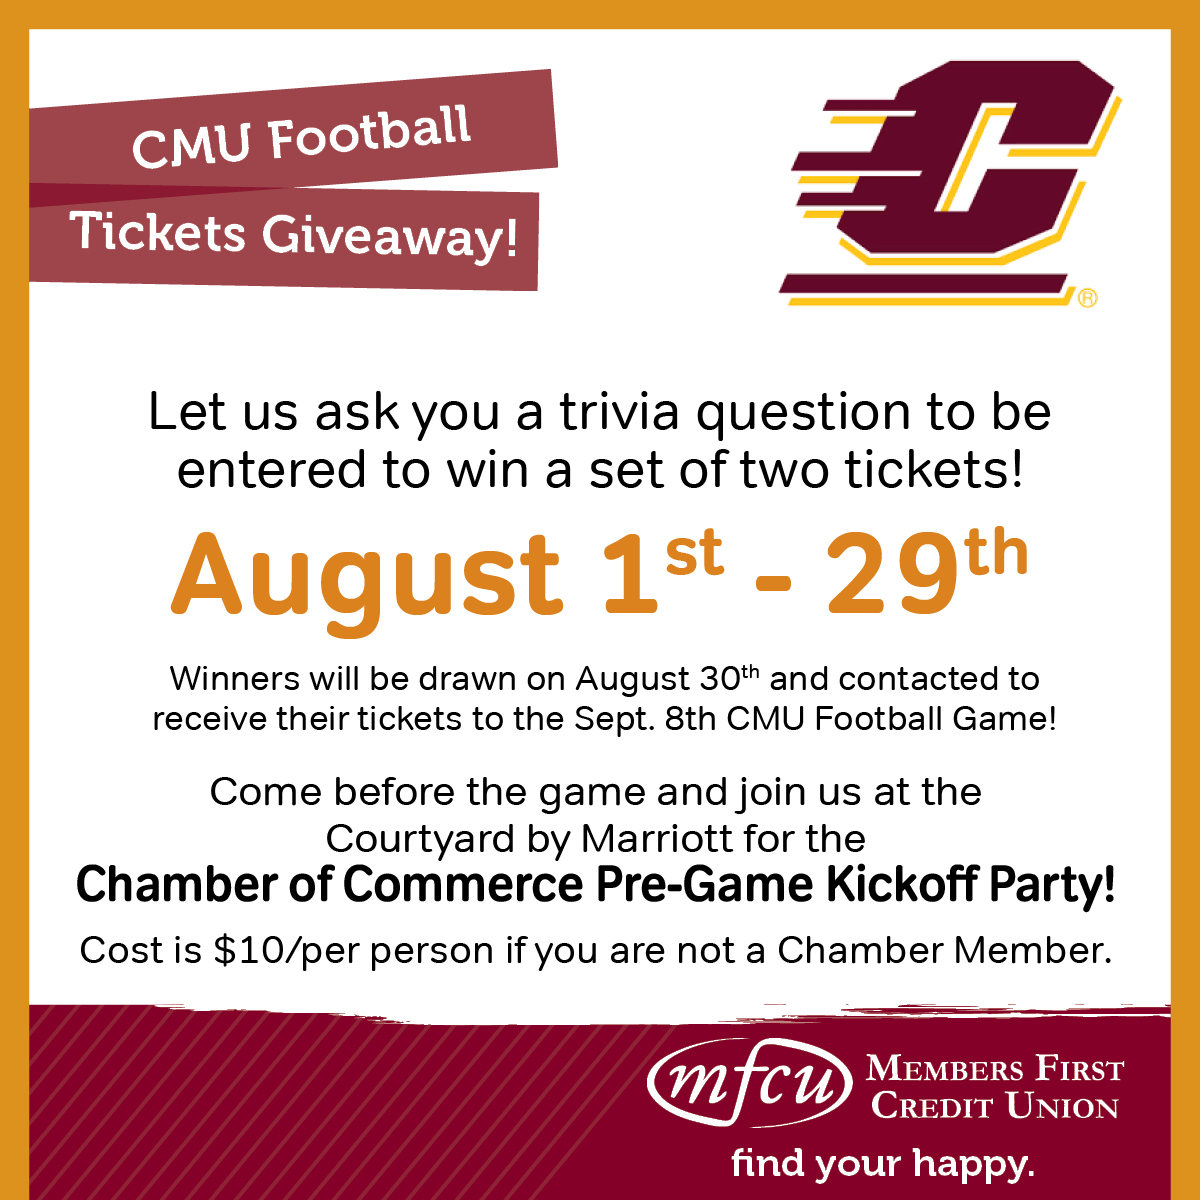 News Resources At Members First Credit Union Members First - cmu ticket giveaway